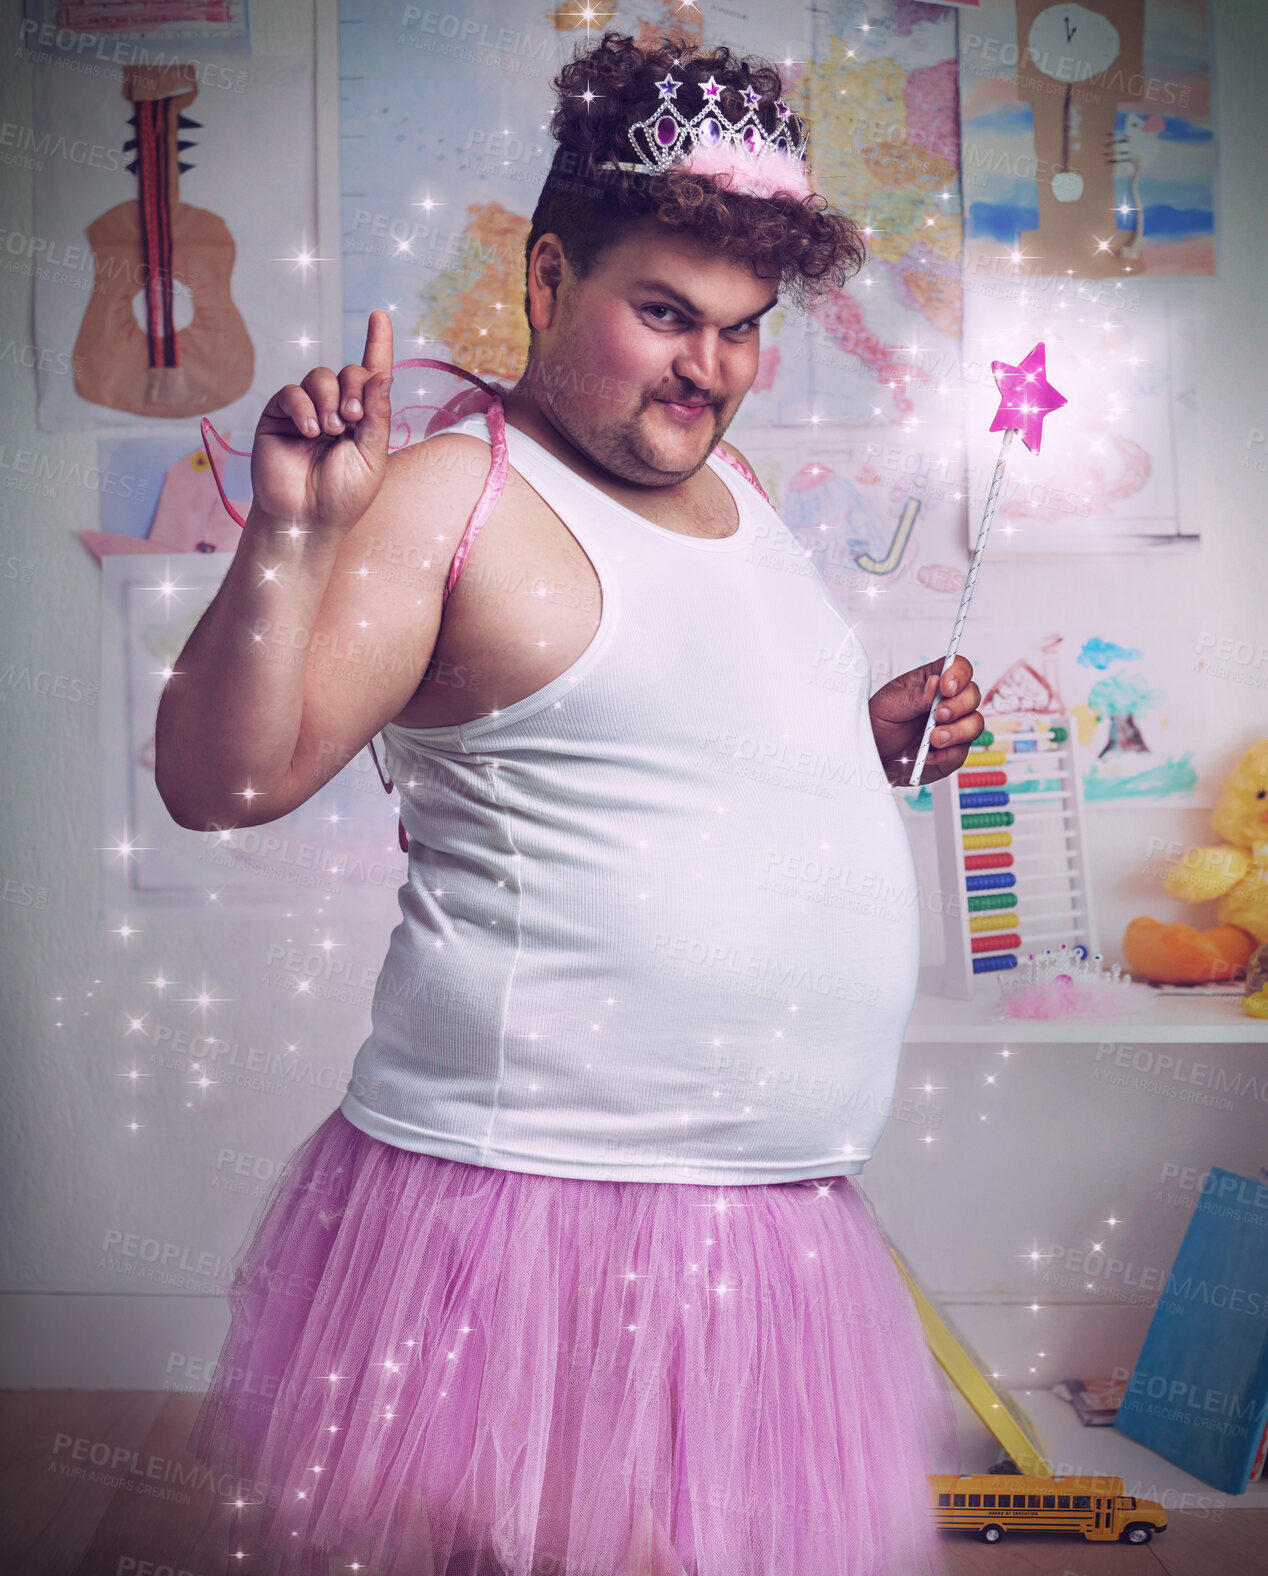 Buy stock photo An overweight man dressed as the tooth fairy